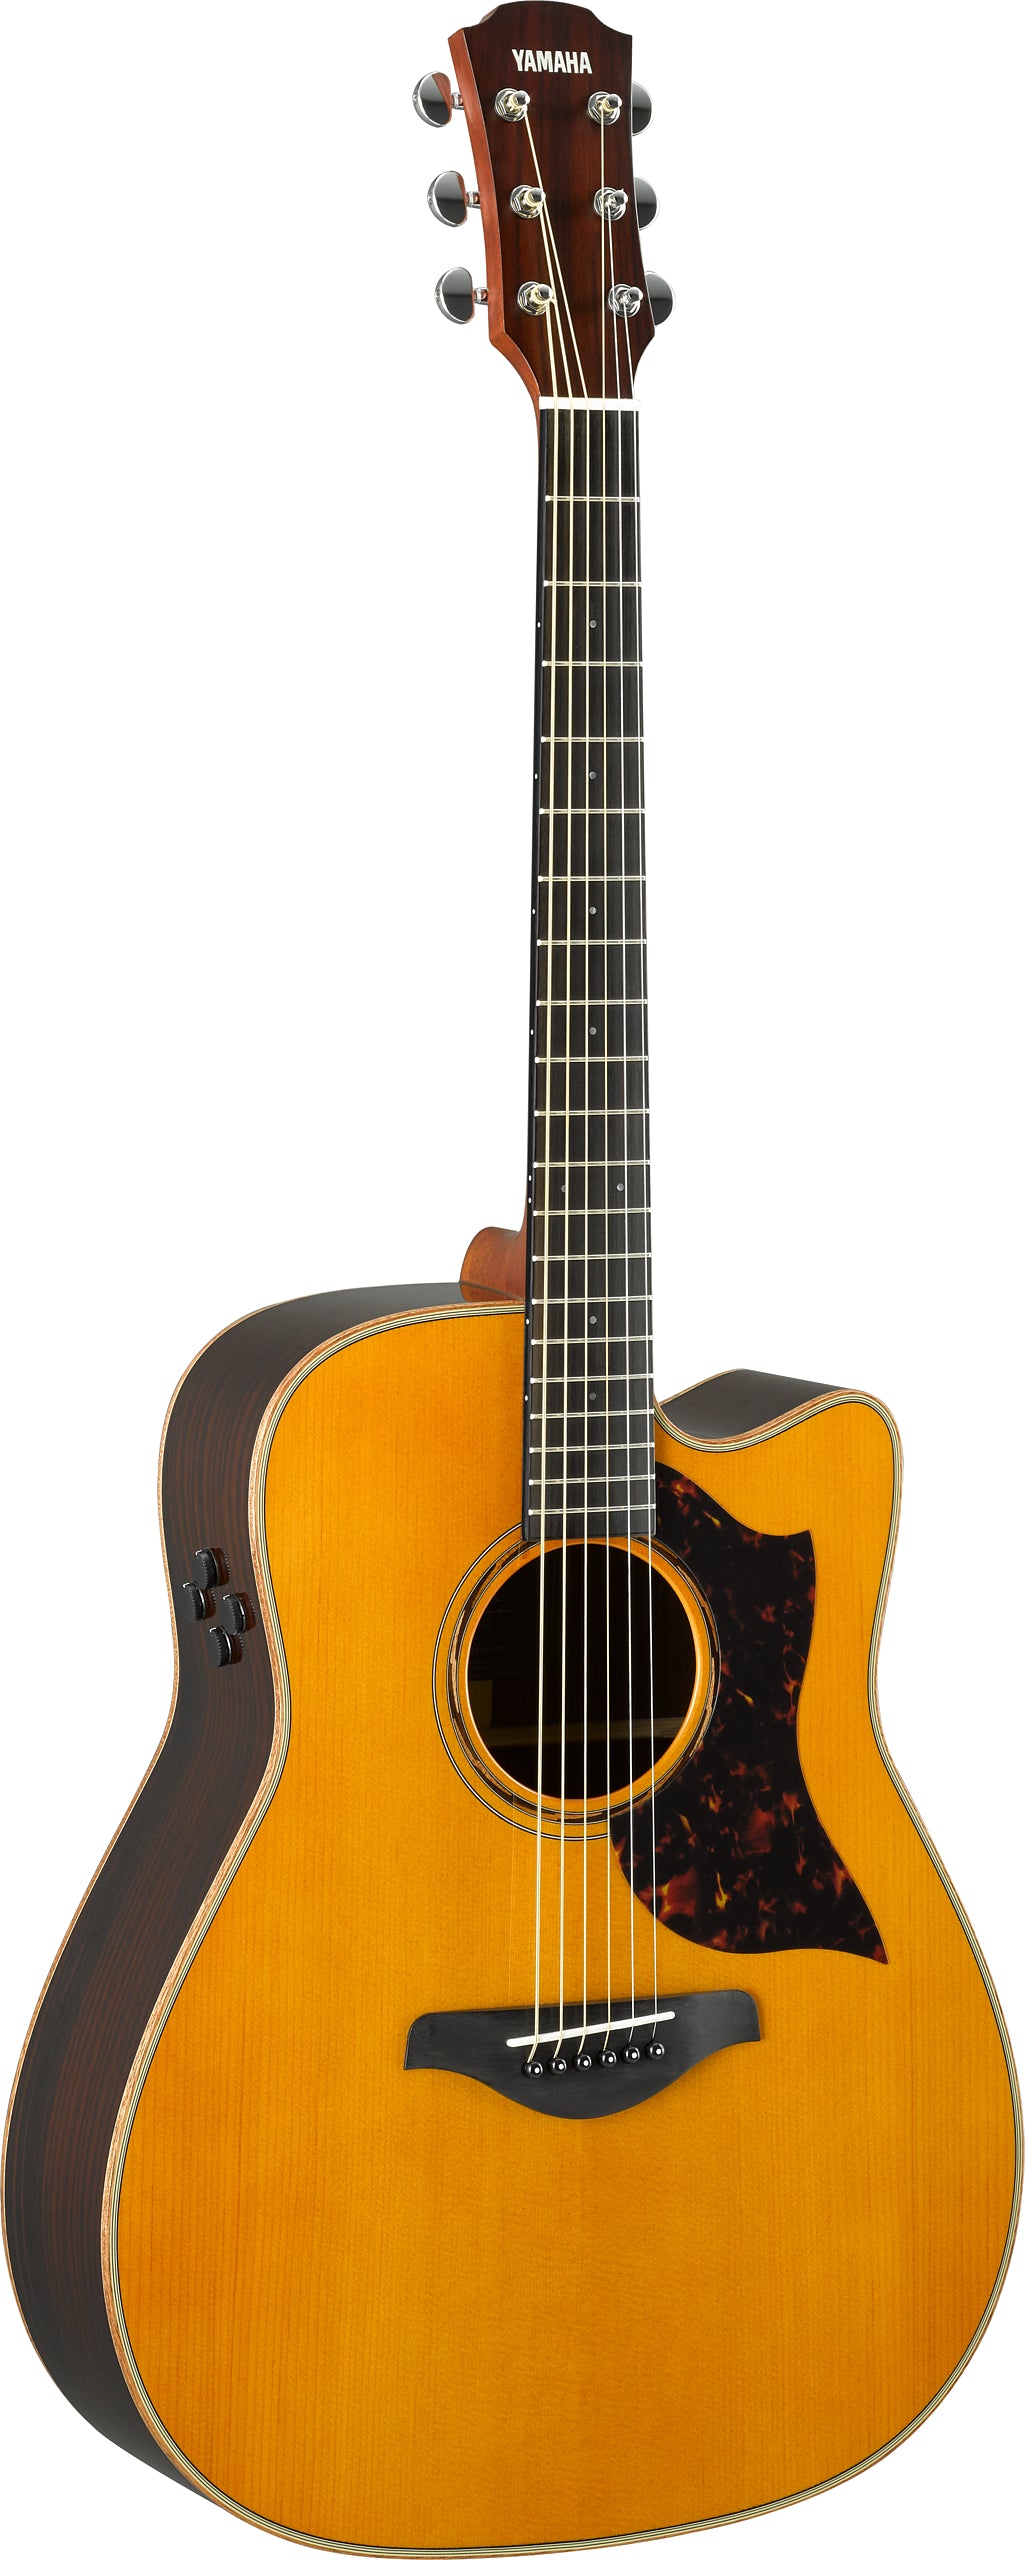 Yamaha APX600 OVS Electric Acoustic Guitar